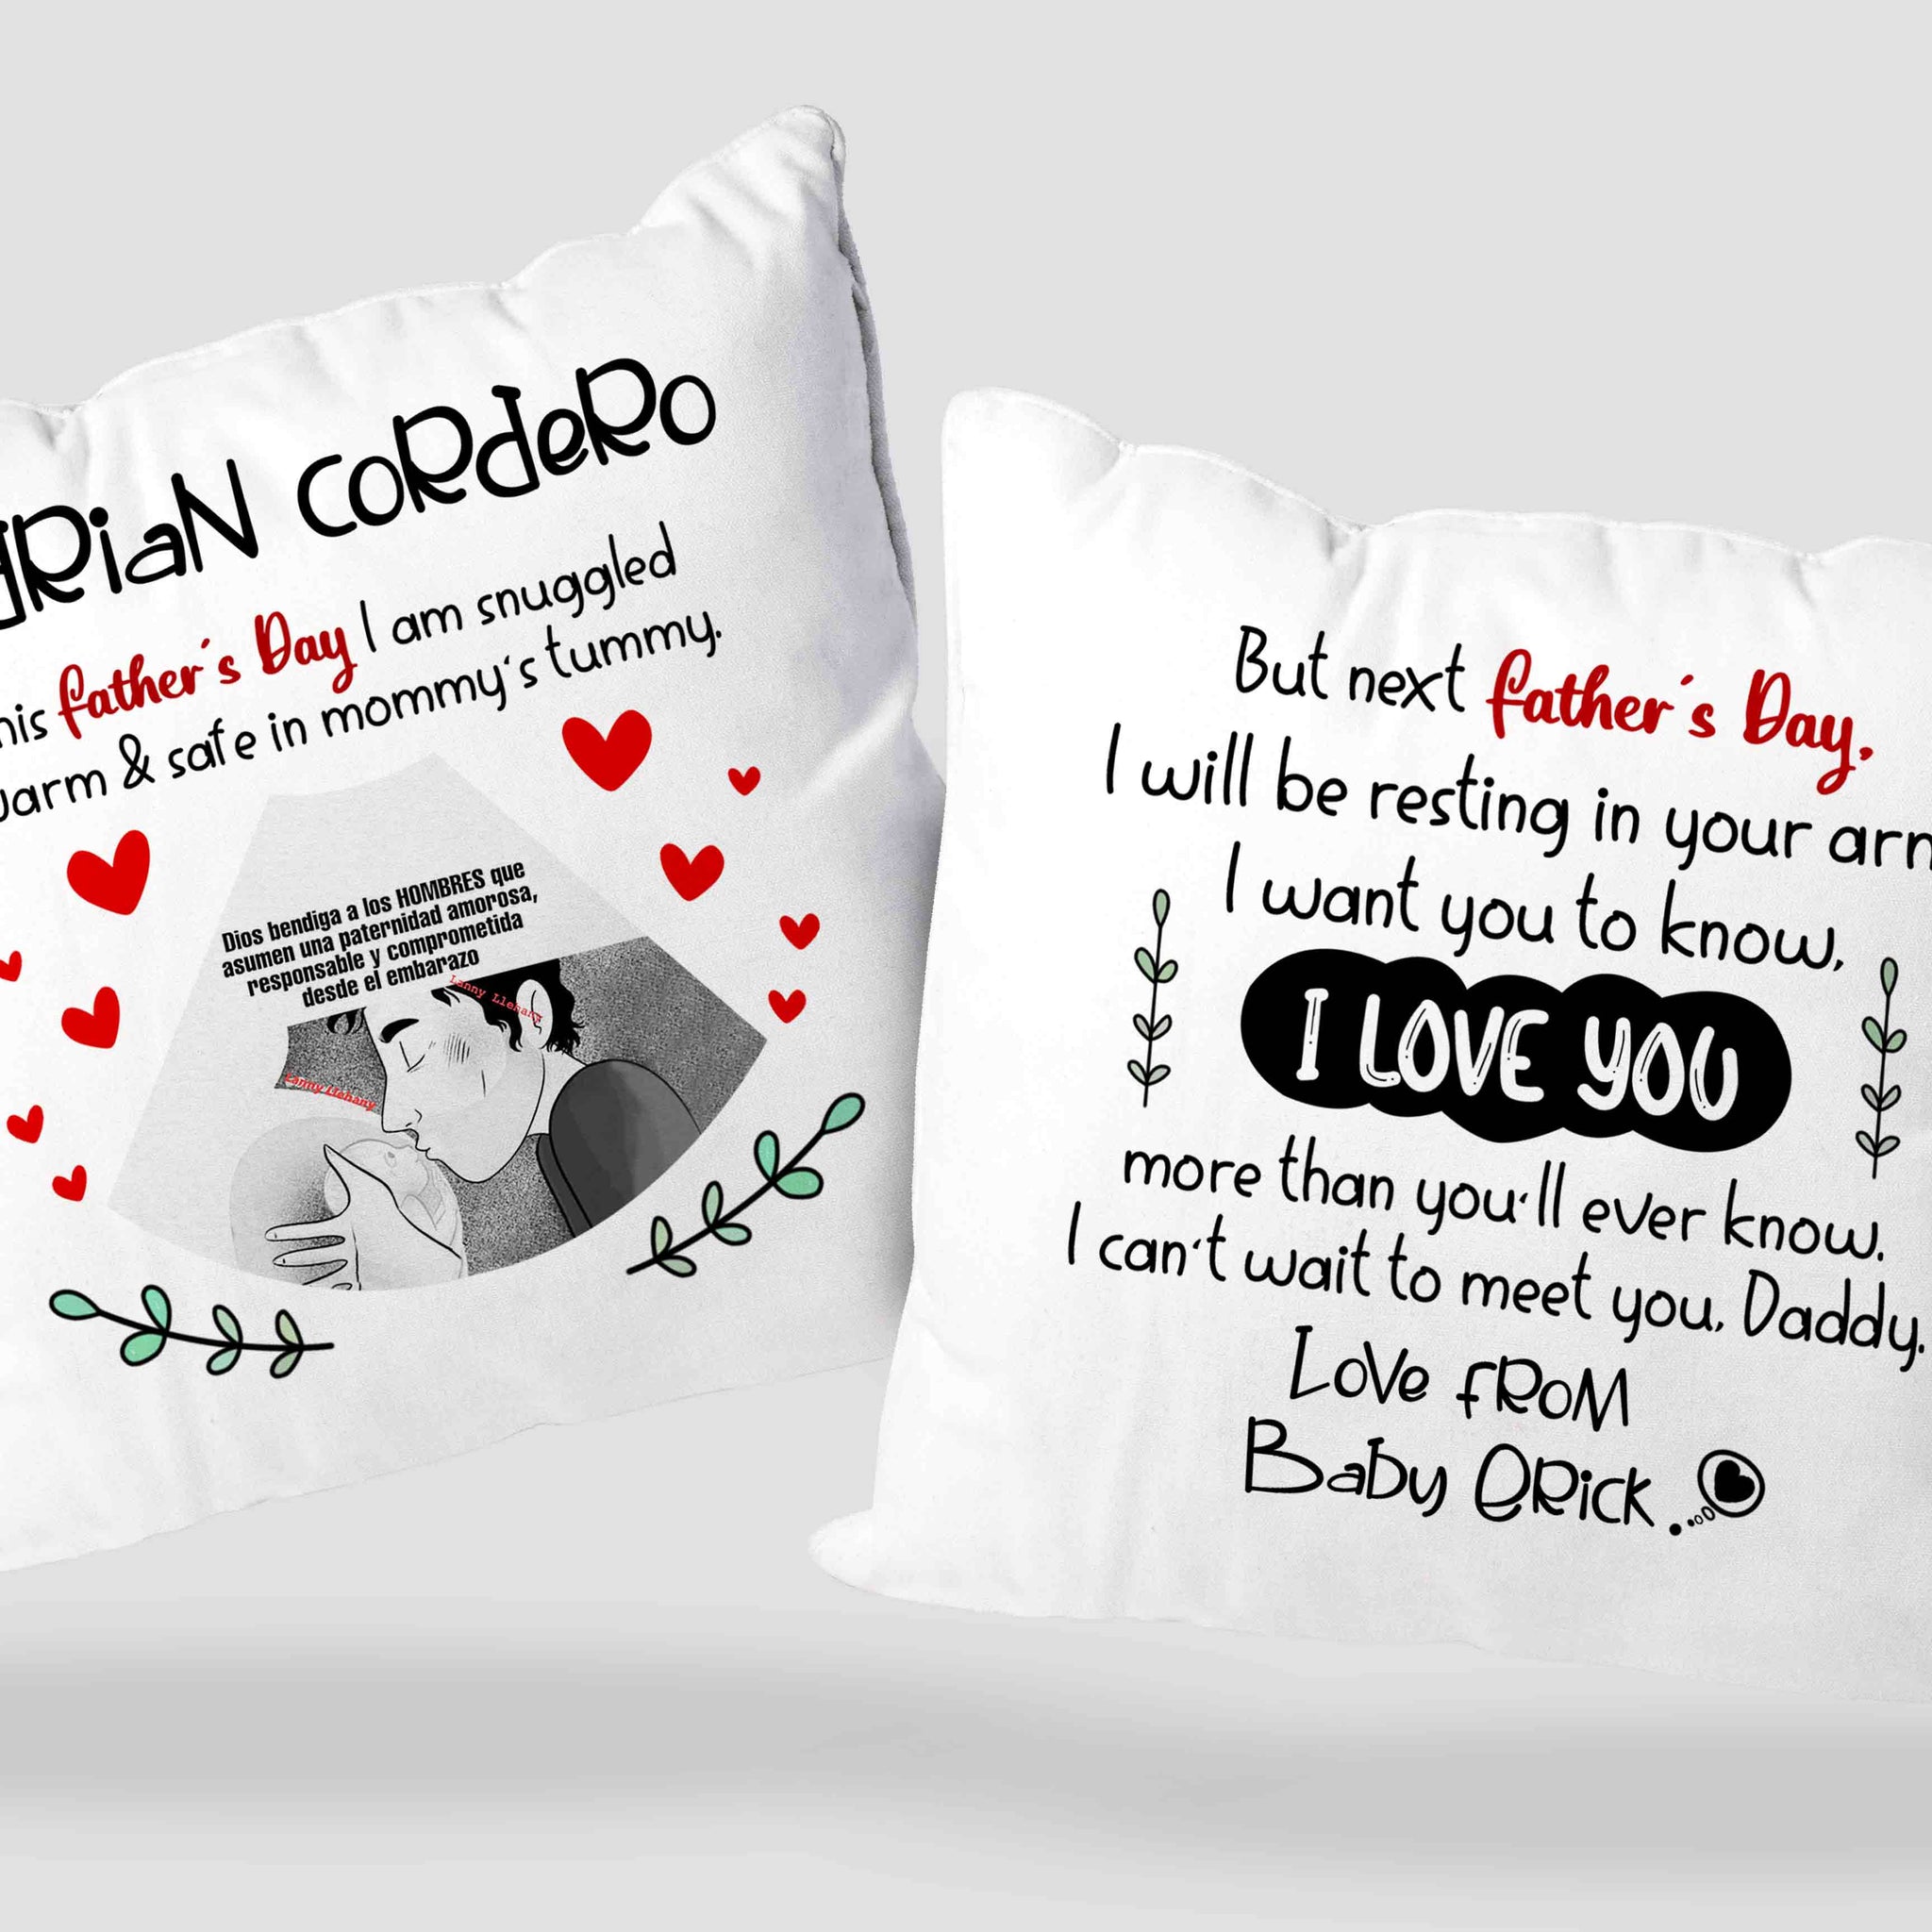 Personalized Pillow For Dad, Expecting Dad Gift, Father's Day Pillow, Soon to be Daddy Pillow, Custom Ultrasound Pillow, Baby Announcement, New Dad Pillow